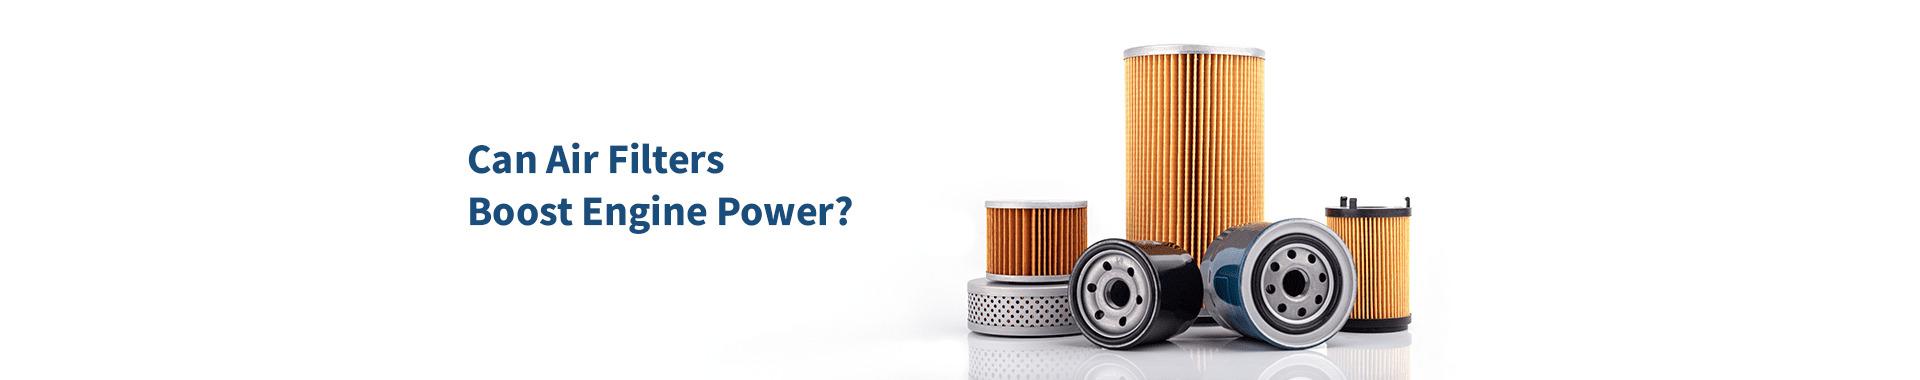 Discover Can Air Filters Increase Engine Power? For Your Vehicle